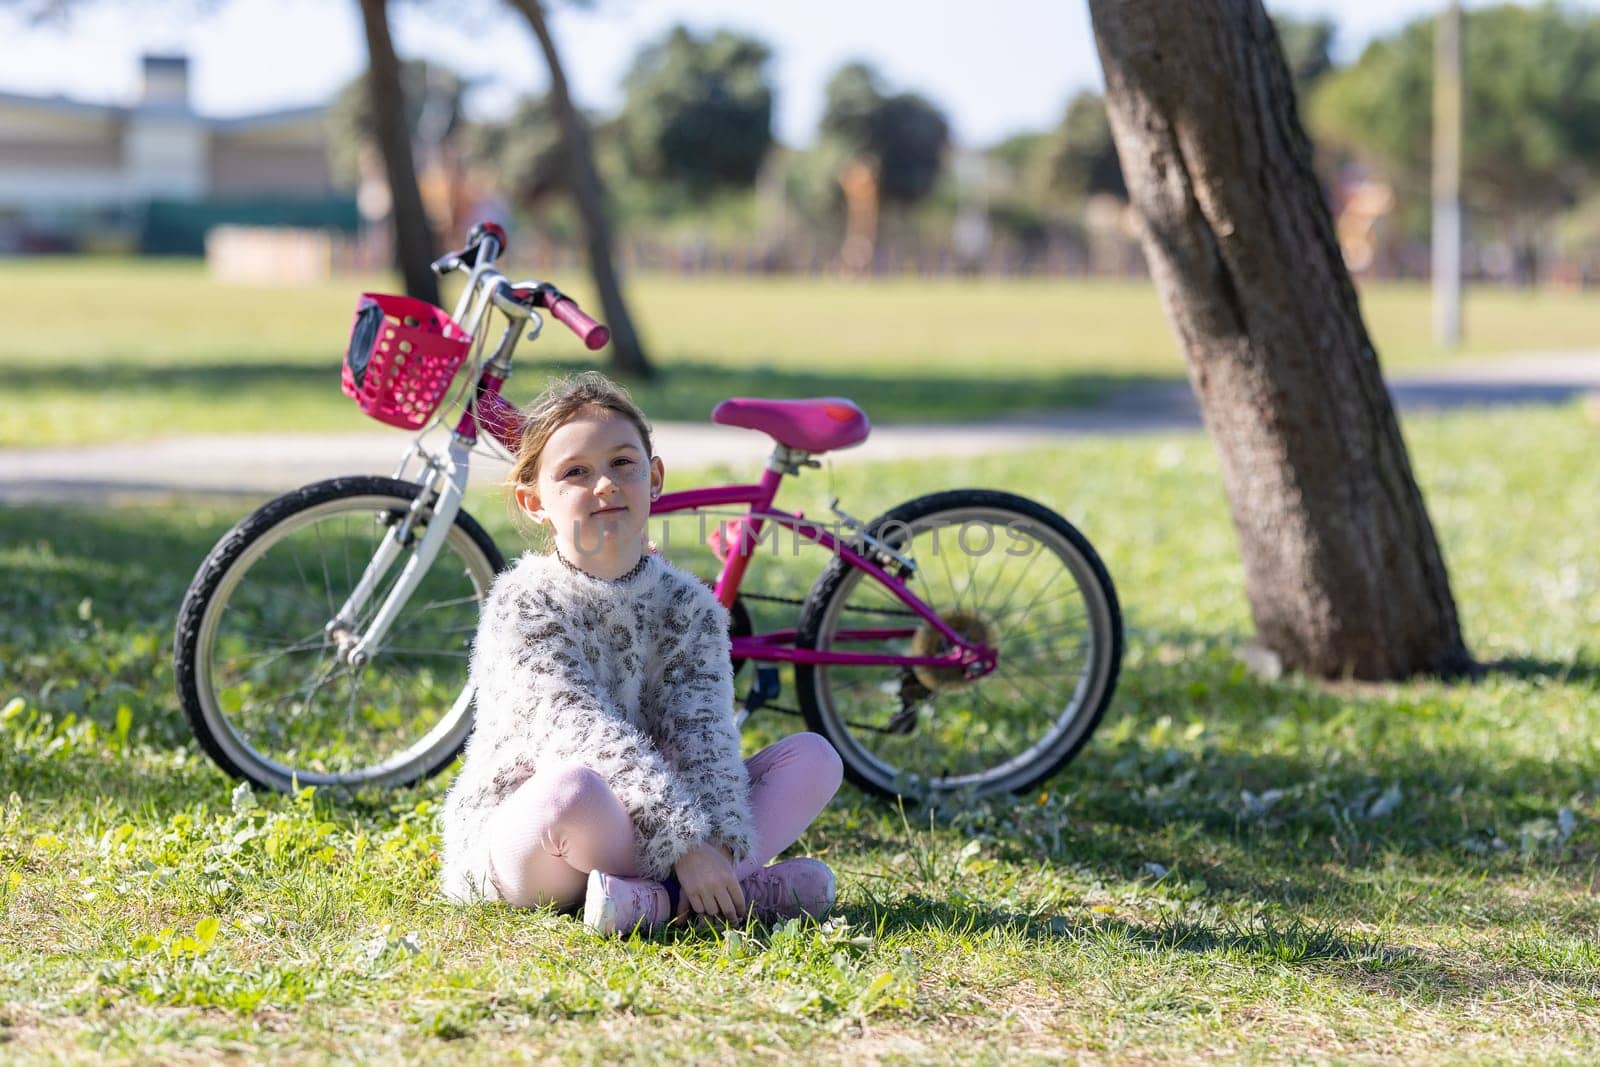 A little girl is sitting on the grass next to a bicycle. She is wearing a pink shirt and white pants